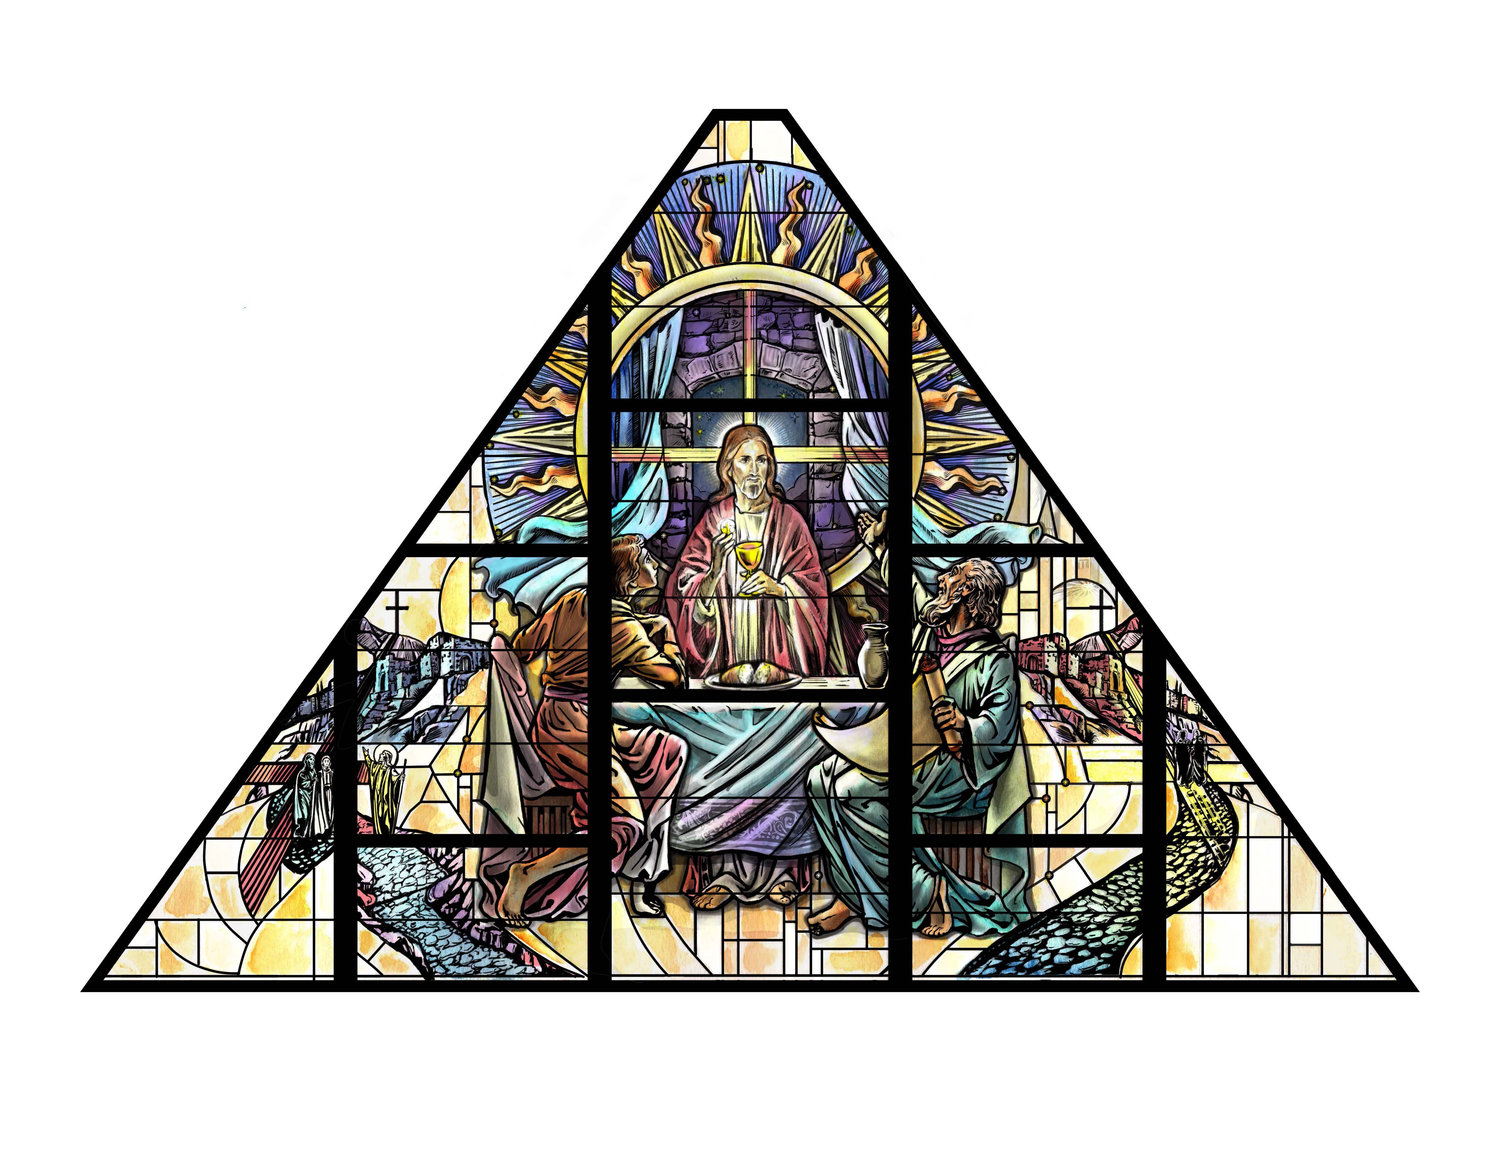 This is a concept design for one of the brilliant new stained-glass windows being created for the Cathedral of St. Joseph. Depicted here is Jesus teaching two disciples on the Road to Emmaus on the day He rose from the dead, and then having them realize Who He is in the breaking of the bread.